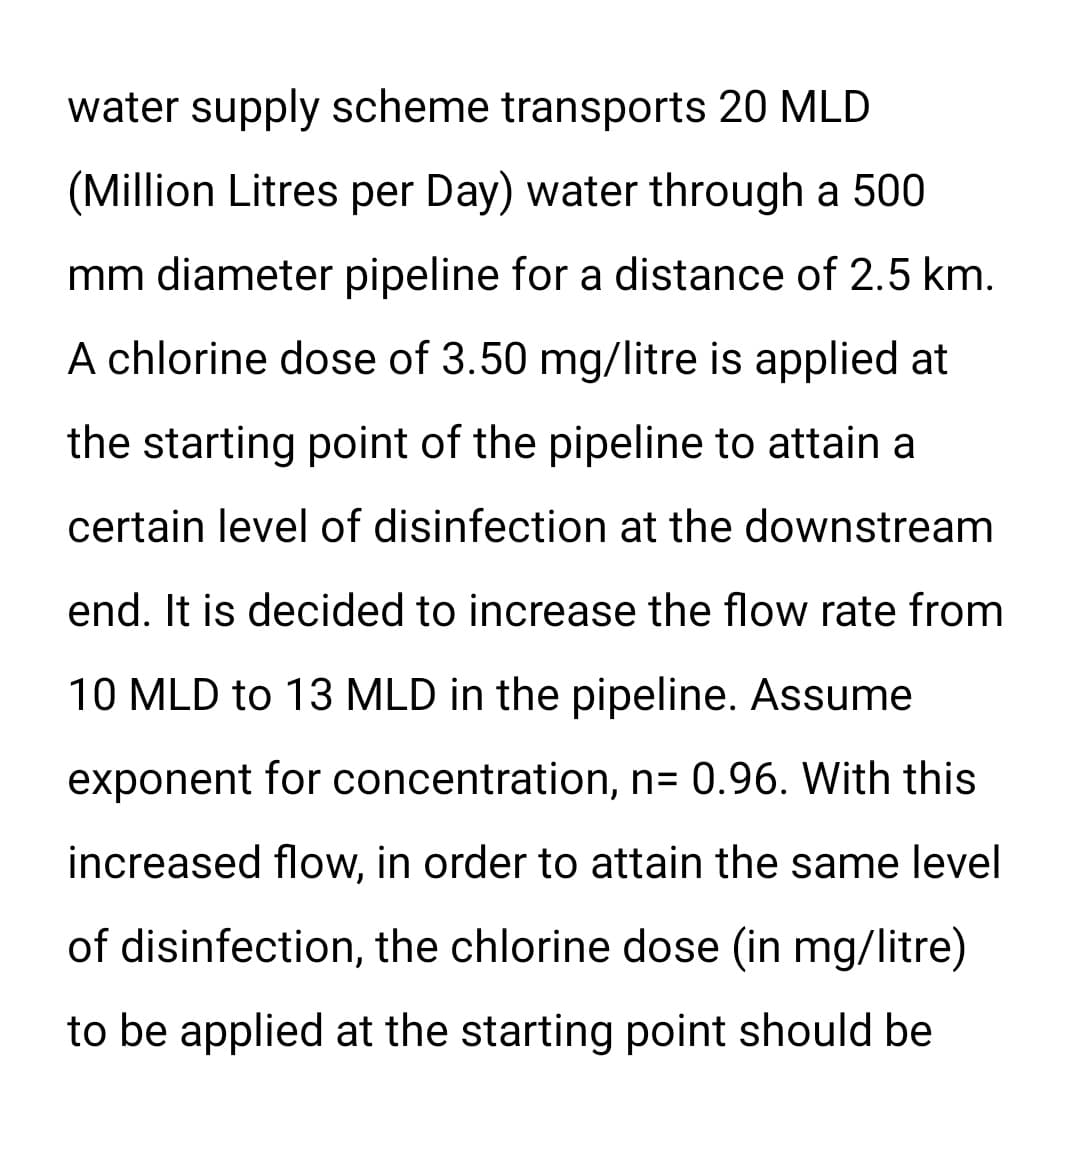 water supply scheme transports 20 MLD
(Million Litres per Day) water through a 500
mm diameter pipeline for a distance of 2.5 km.
A chlorine dose of 3.50 mg/litre is applied at
the starting point of the pipeline to attain a
certain level of disinfection at the downstream
end. It is decided to increase the flow rate from
10 MLD to 13 MLD in the pipeline. Assume
exponent for concentration, n= 0.96. With this
increased flow, in order to attain the same level
of disinfection, the chlorine dose (in mg/litre)
to be applied at the starting point should be